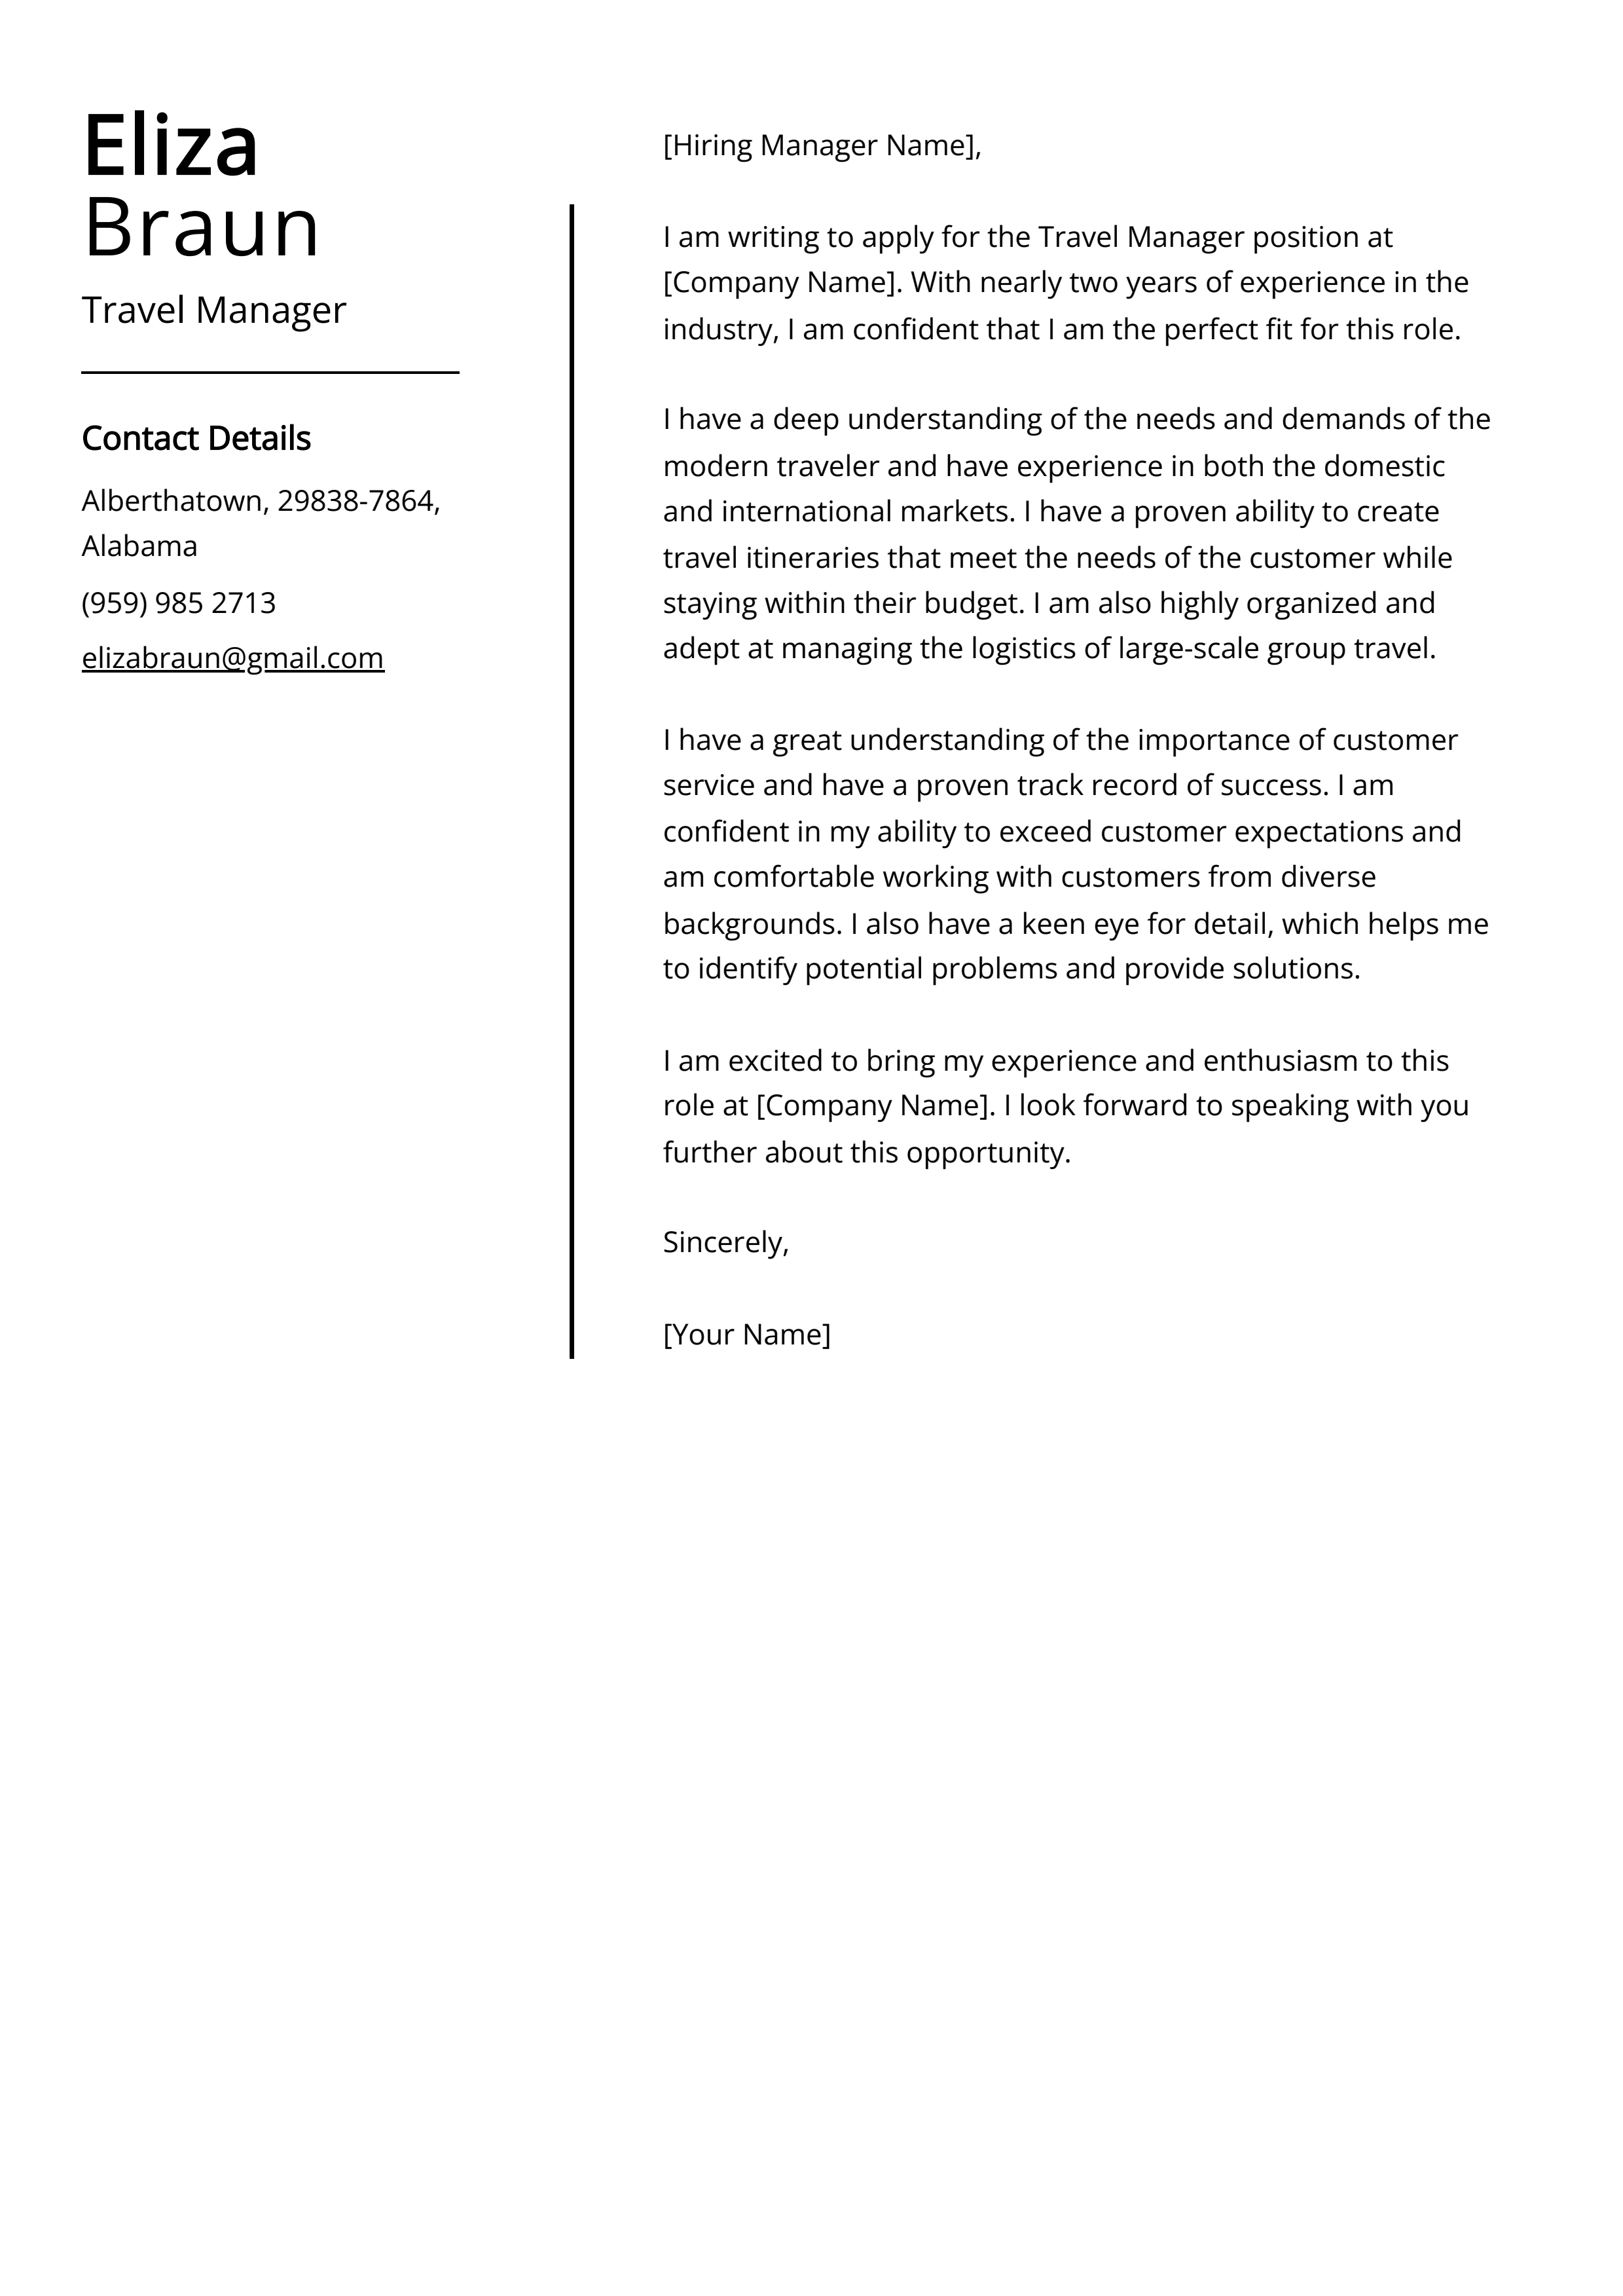 Travel Manager Cover Letter Example